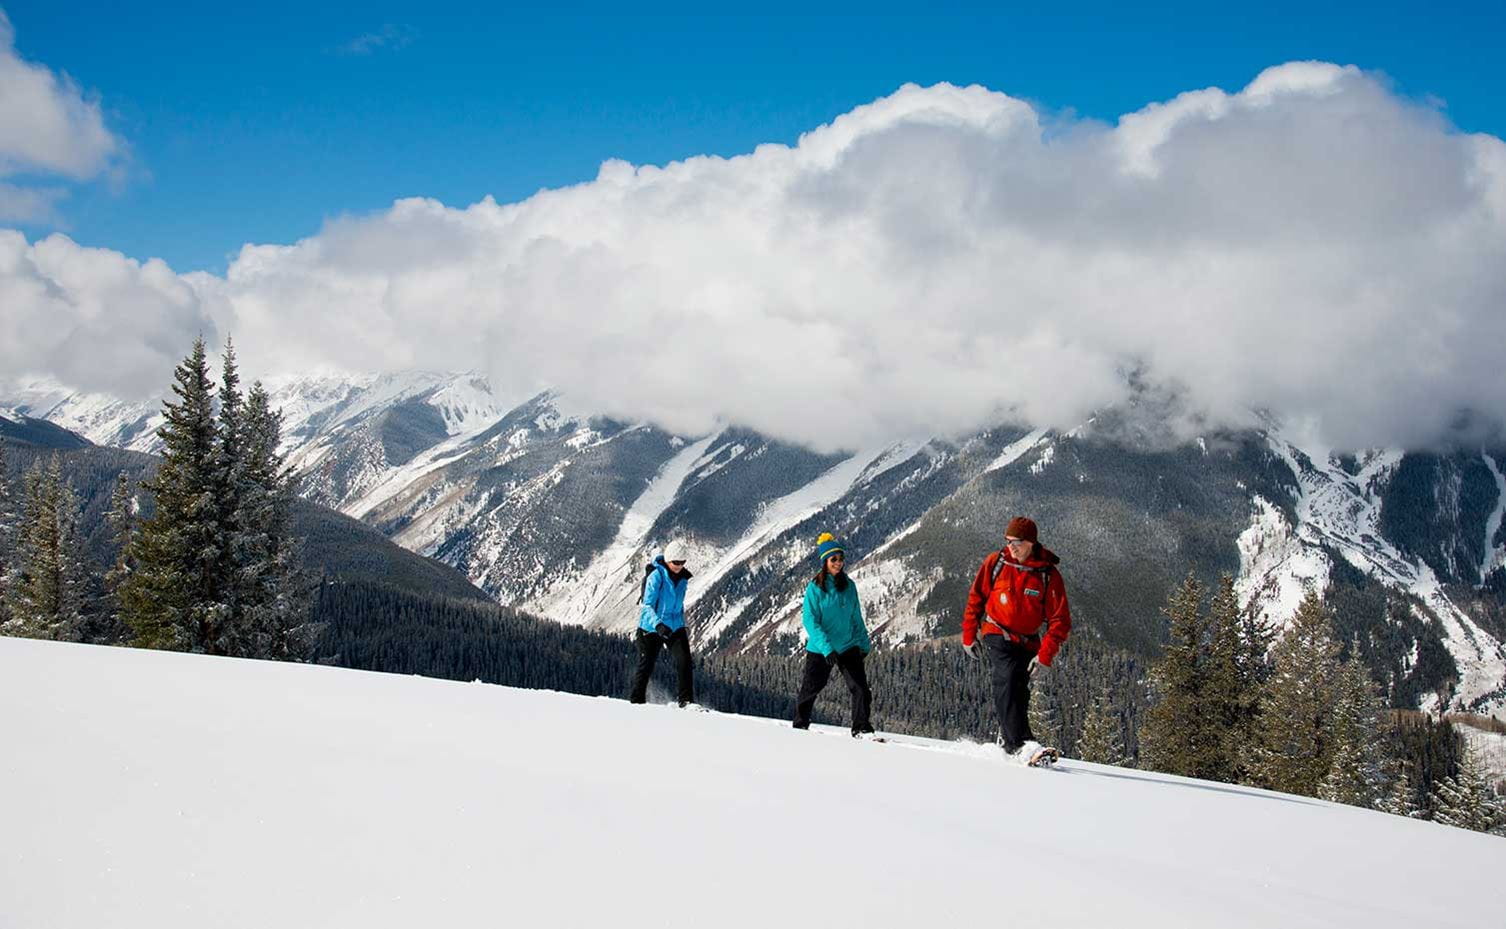 Snowshoeing along a ridge above the clouds on Aspen Mountain